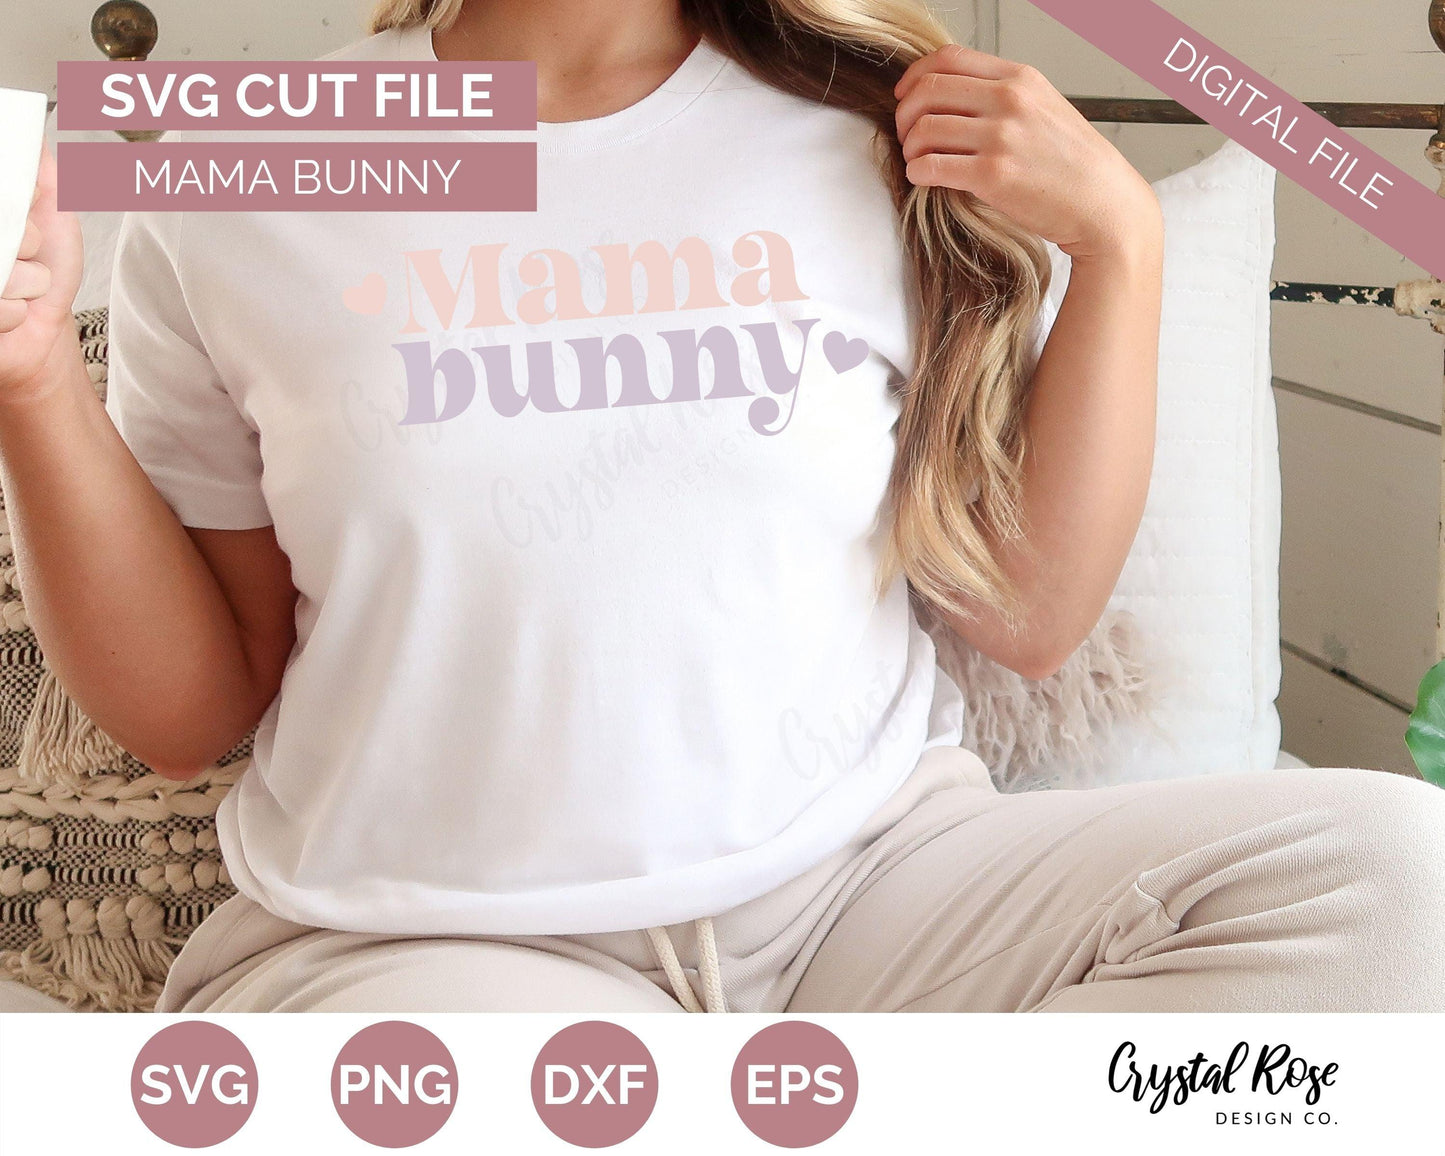 Mama Bunny SVG, Easter SVG, Digital Download, Cricut, Silhouette, Glowforge (includes svg/png/dxf/eps) - Crystal Rose Design Co.